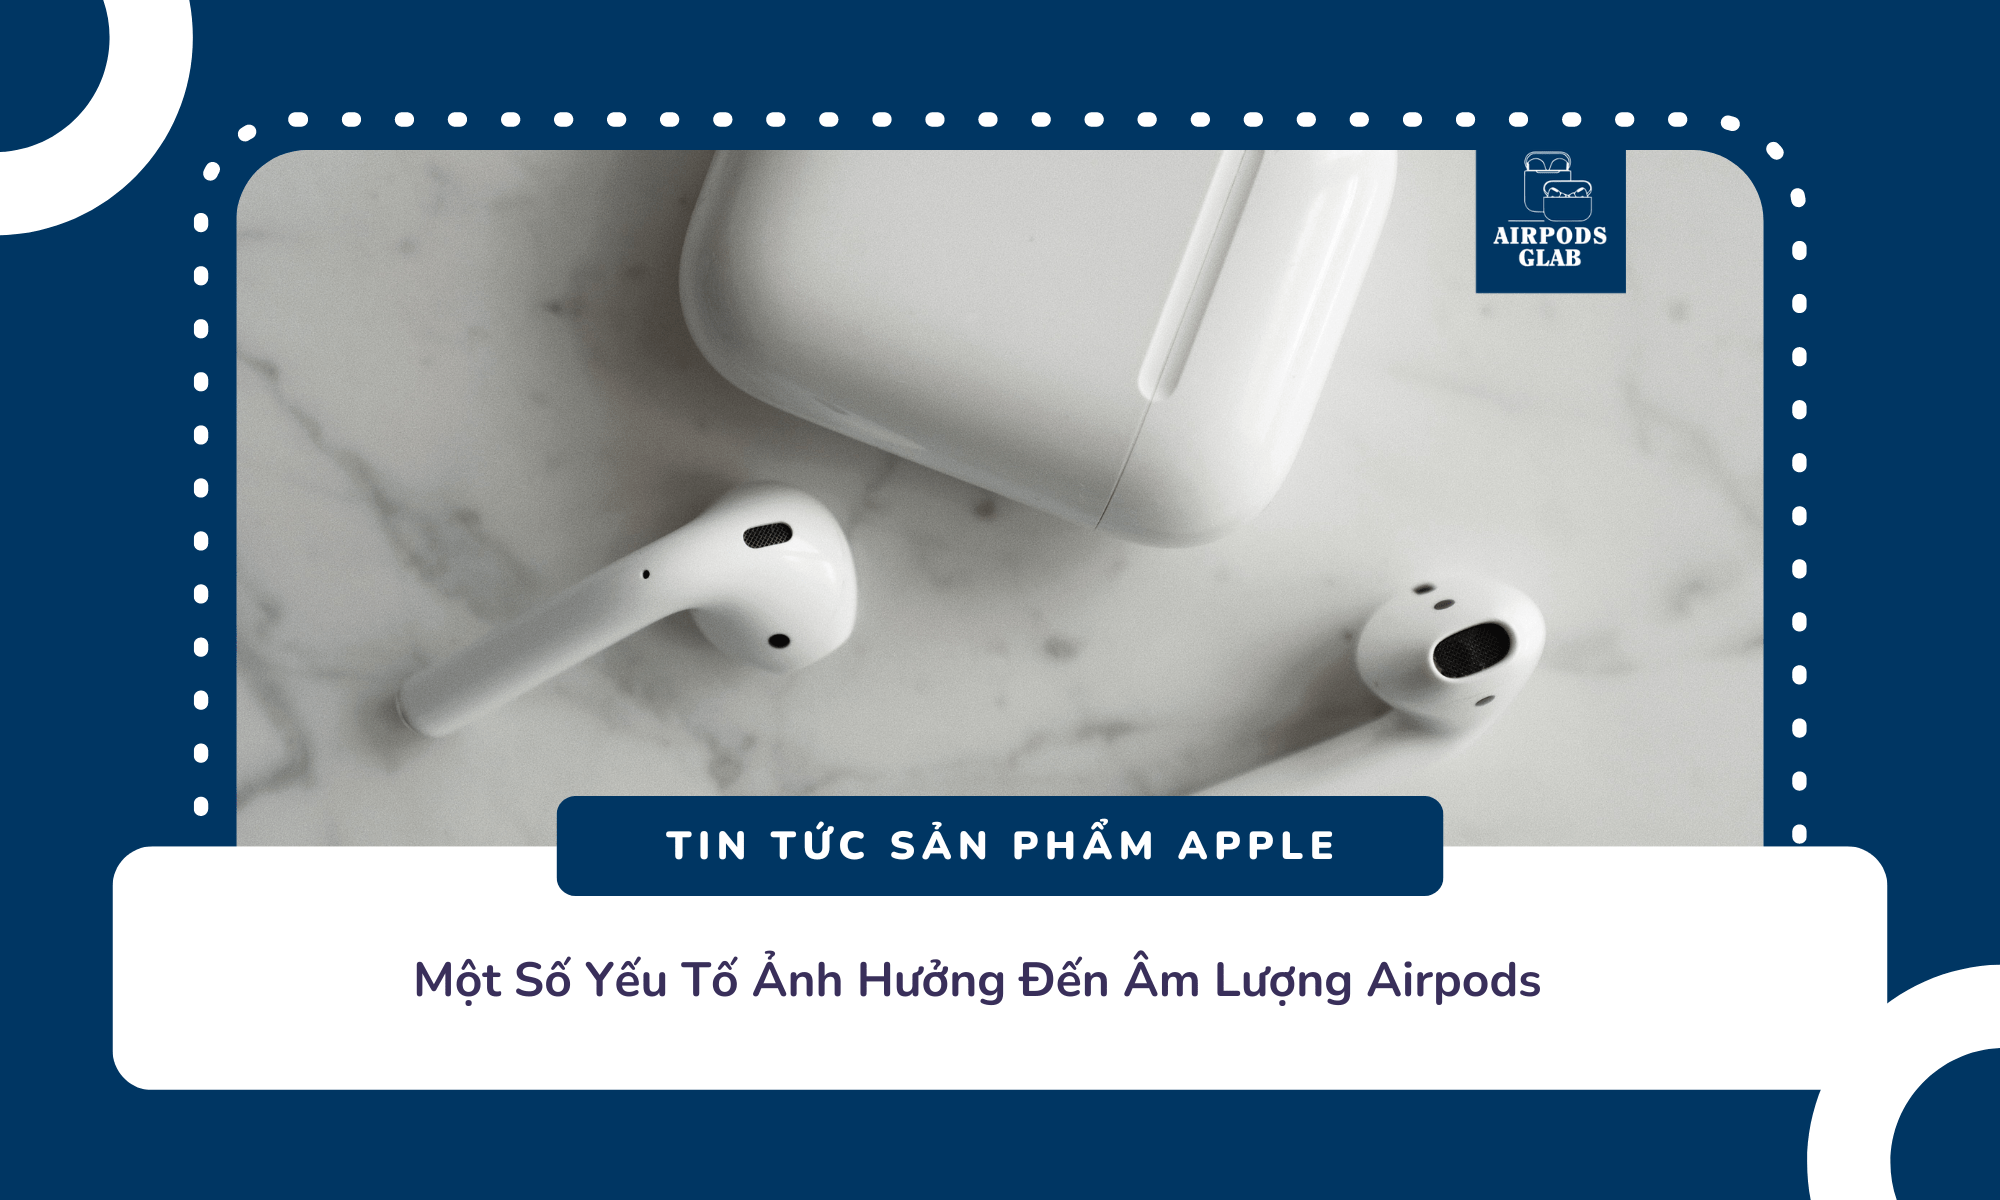 cach-chinh-am-luong-airpod 